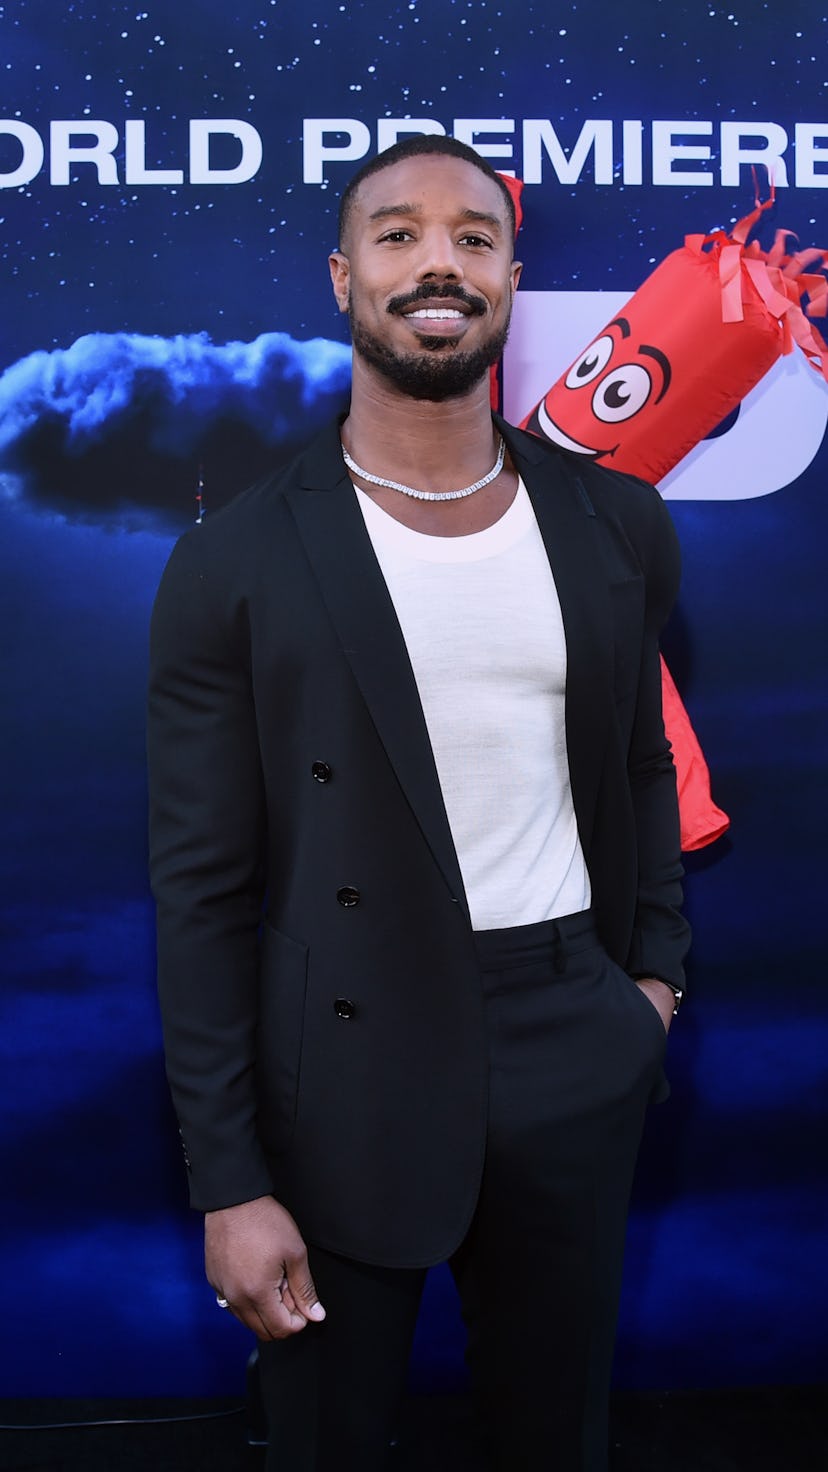 HOLLYWOOD, CALIFORNIA - JULY 18: (VANITY FAIR OUT) Michael B. Jordan attends the world premiere of U...